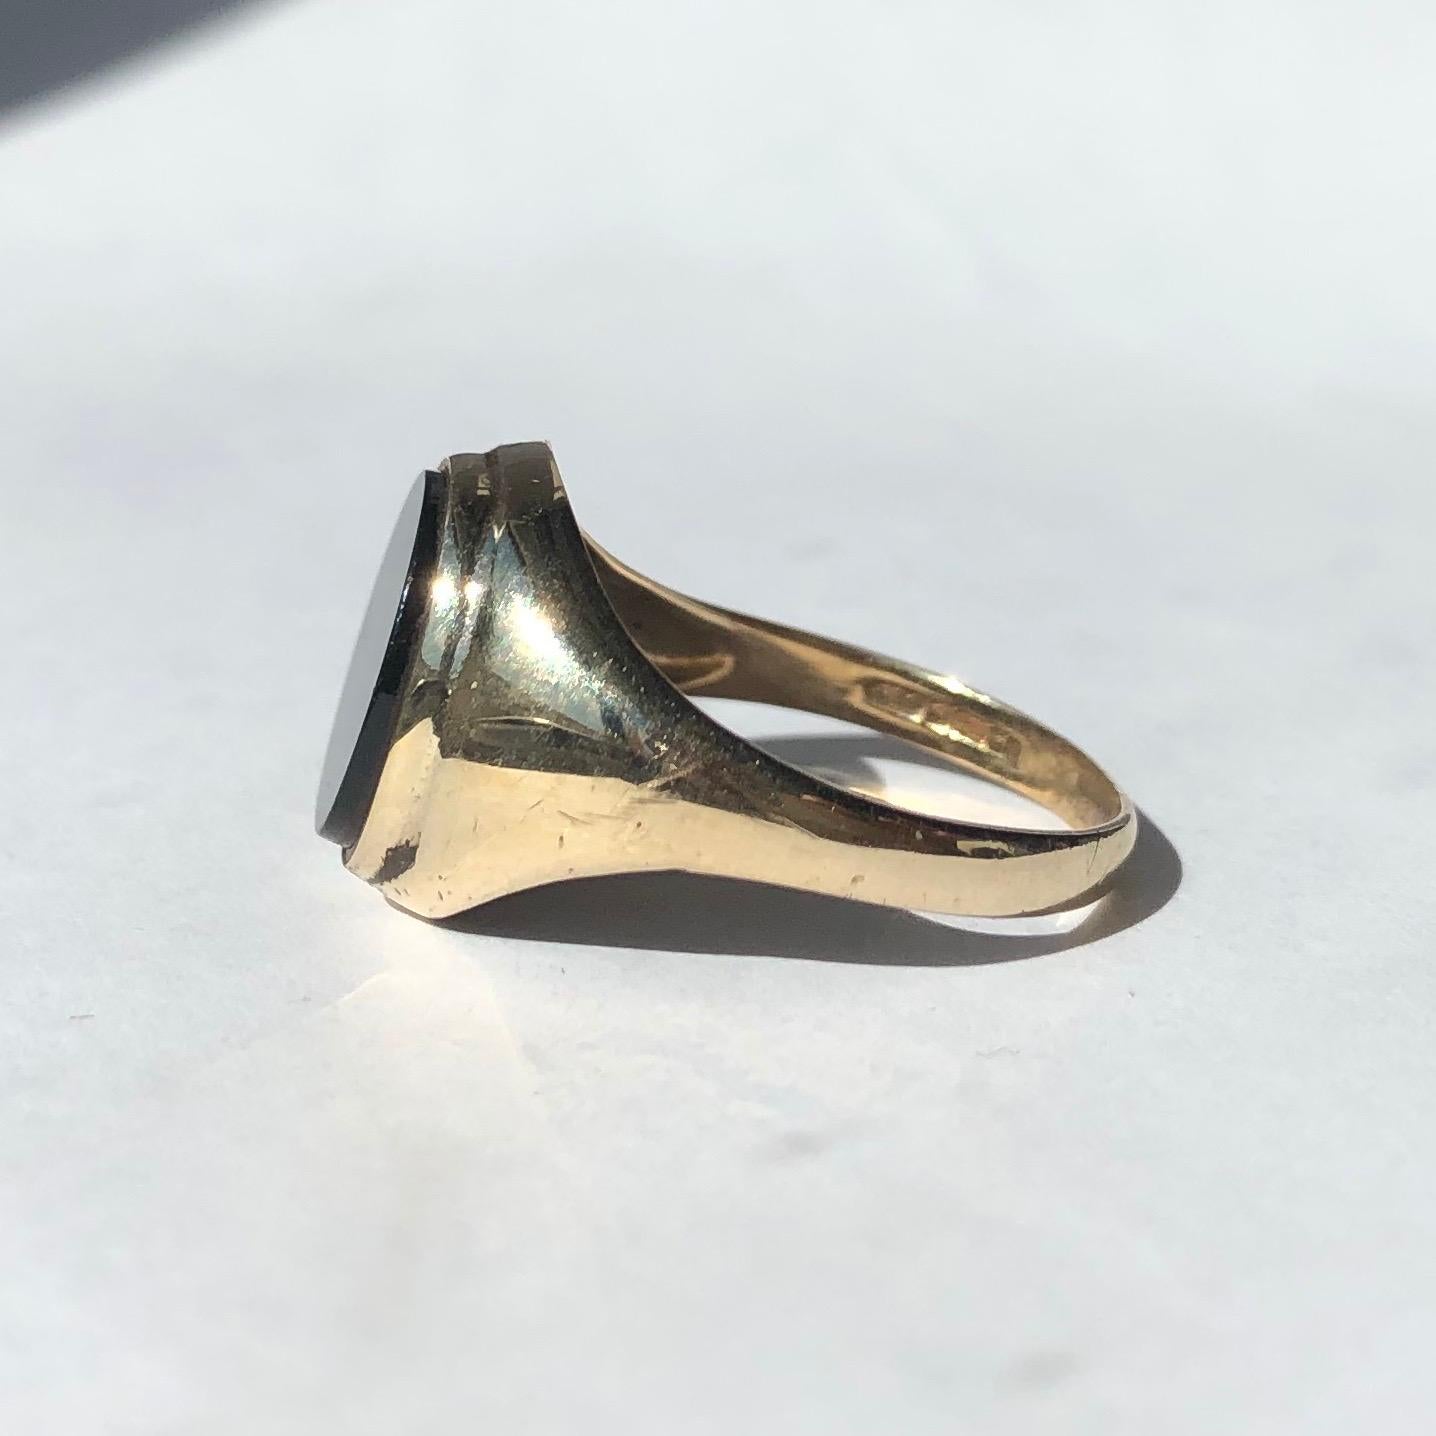 The onyx in this signet ring is in lovely condition and it so glossy! The stone is set within the 9ct gold band and this piece was made in London, England. 

Ring Size: Q or 8
Stone Dimensions: 11.5x10mm 

Weight: 2.28g